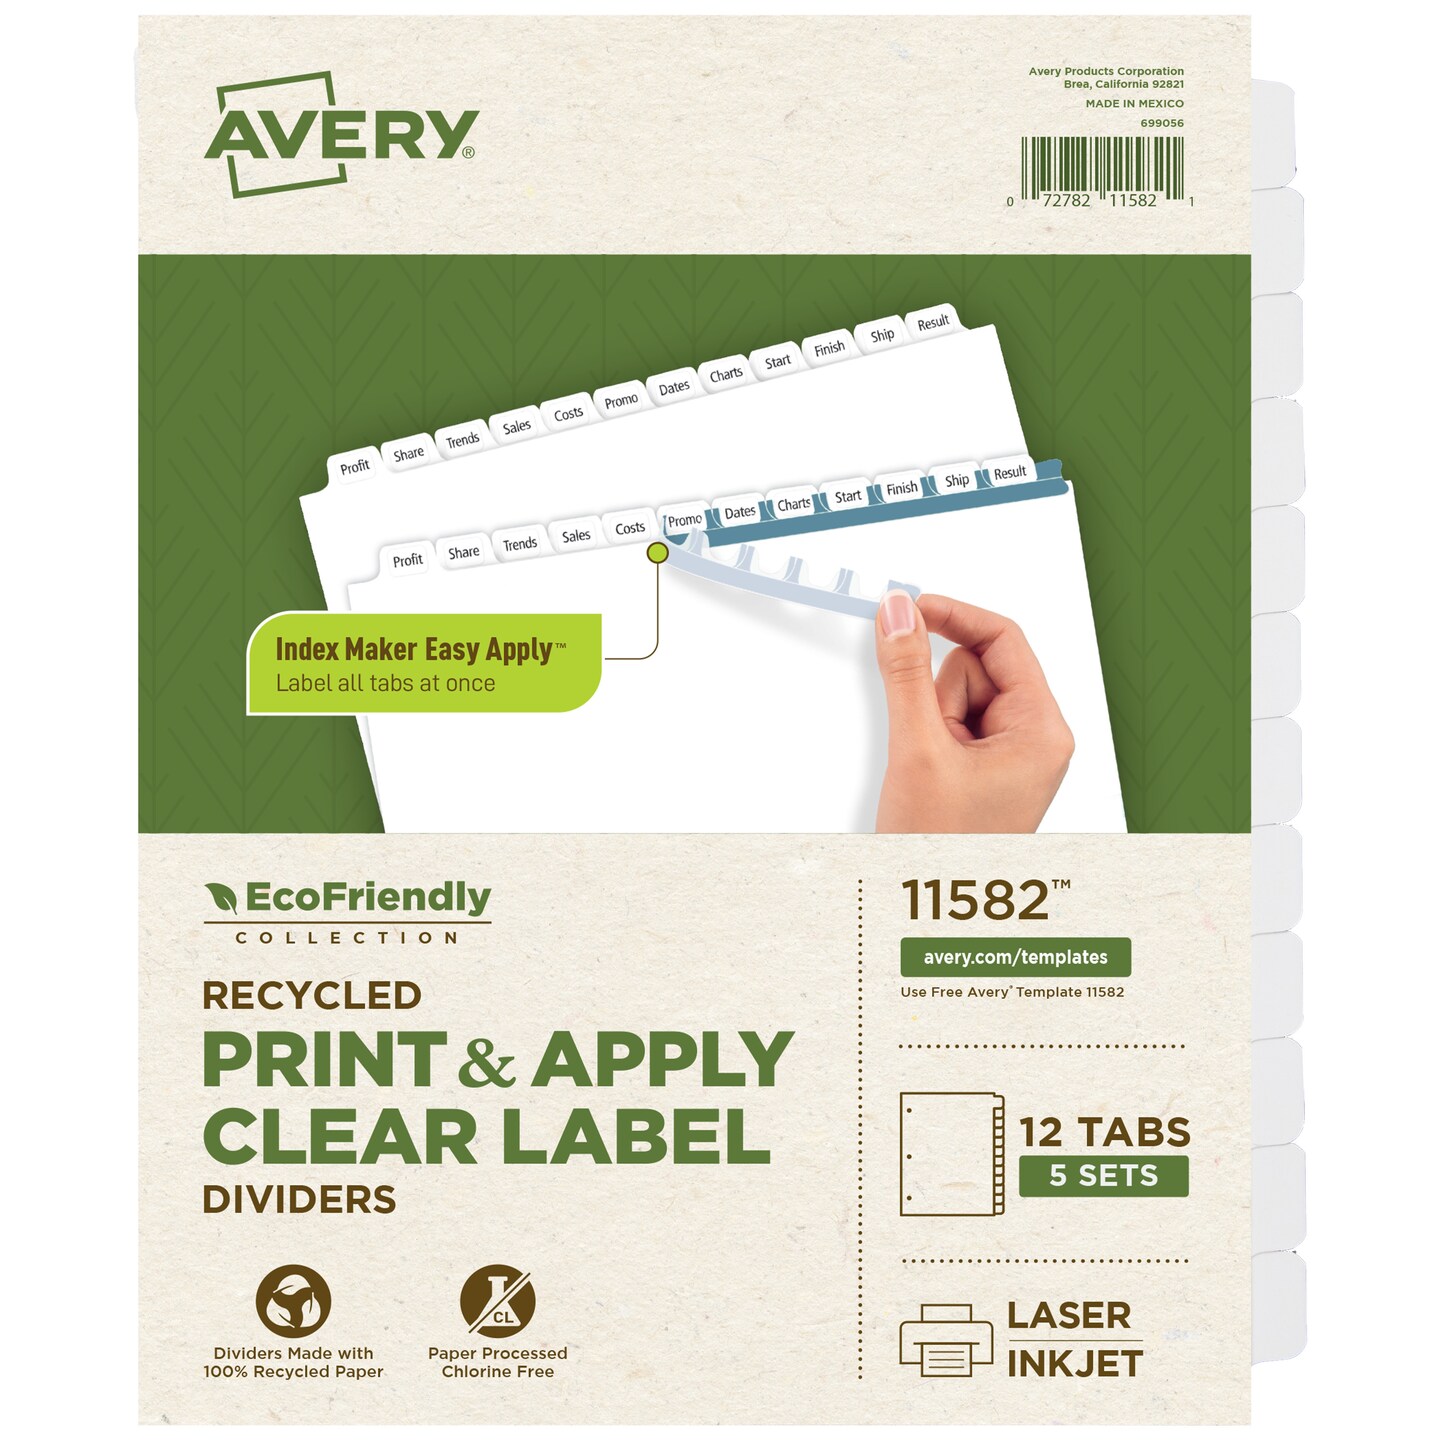 Avery EcoFriendly Recycled Dividers for 3 Ring Binders, 12-Tab, White Tabs, Index Maker Print and Apply Clear Label Strip, 5 Sets for 60 Binder Dividers Total (11582)